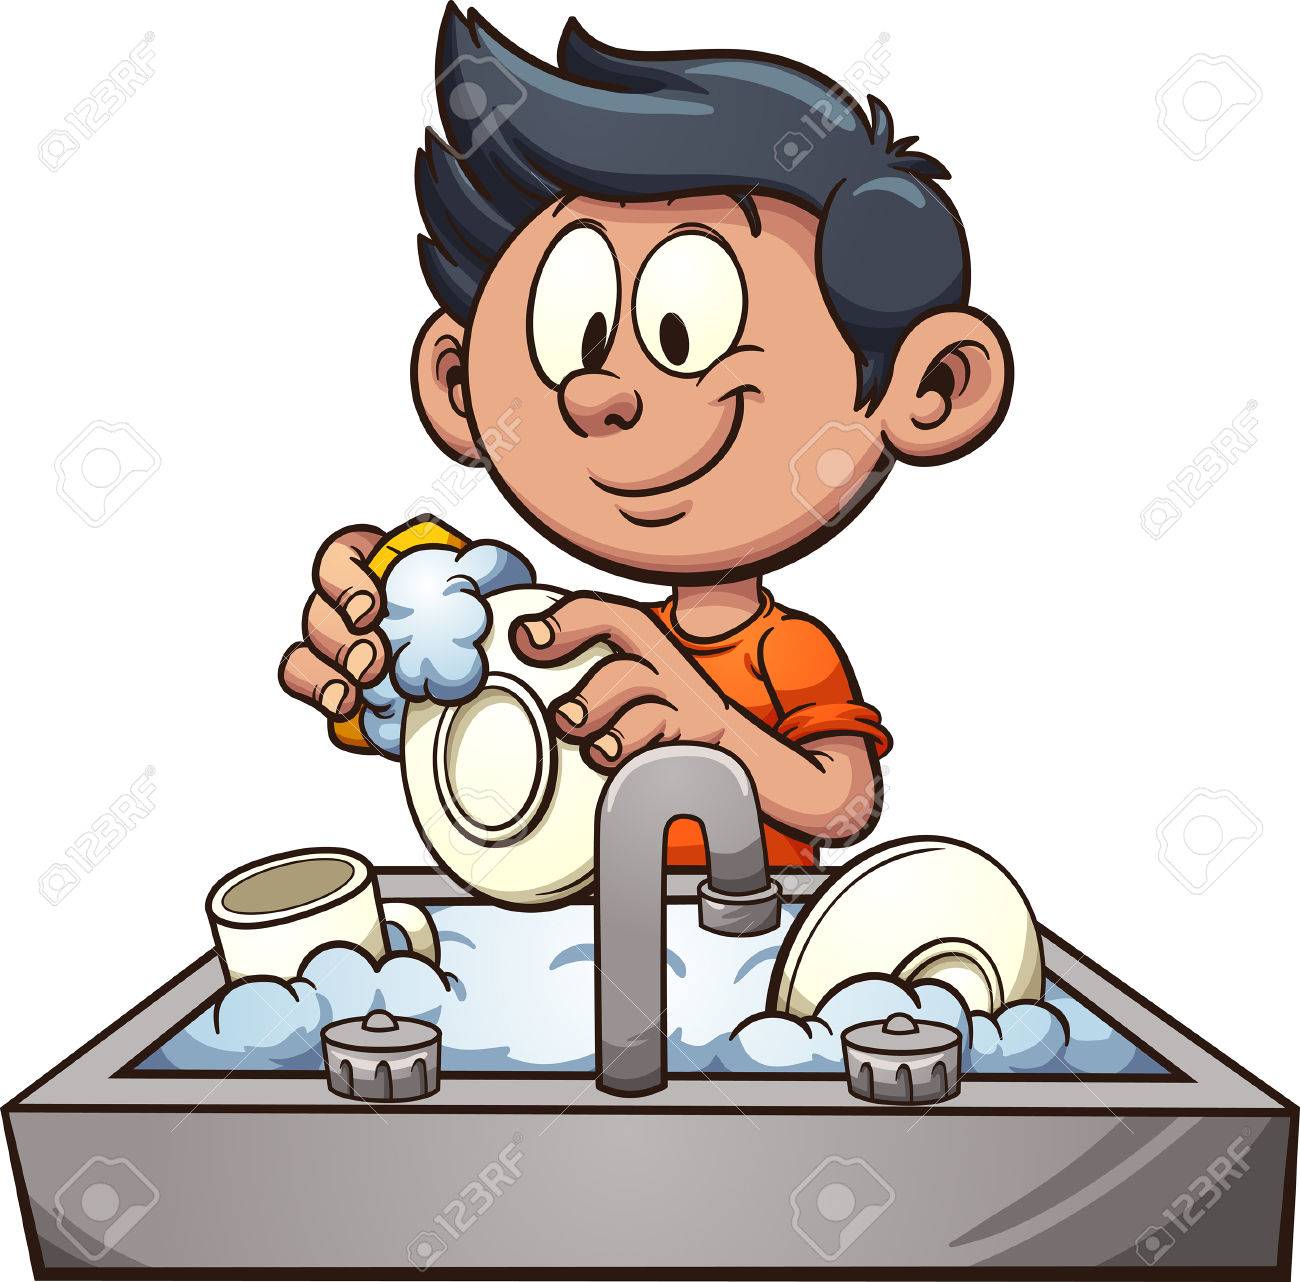 Washing Dishes Clipart Free.